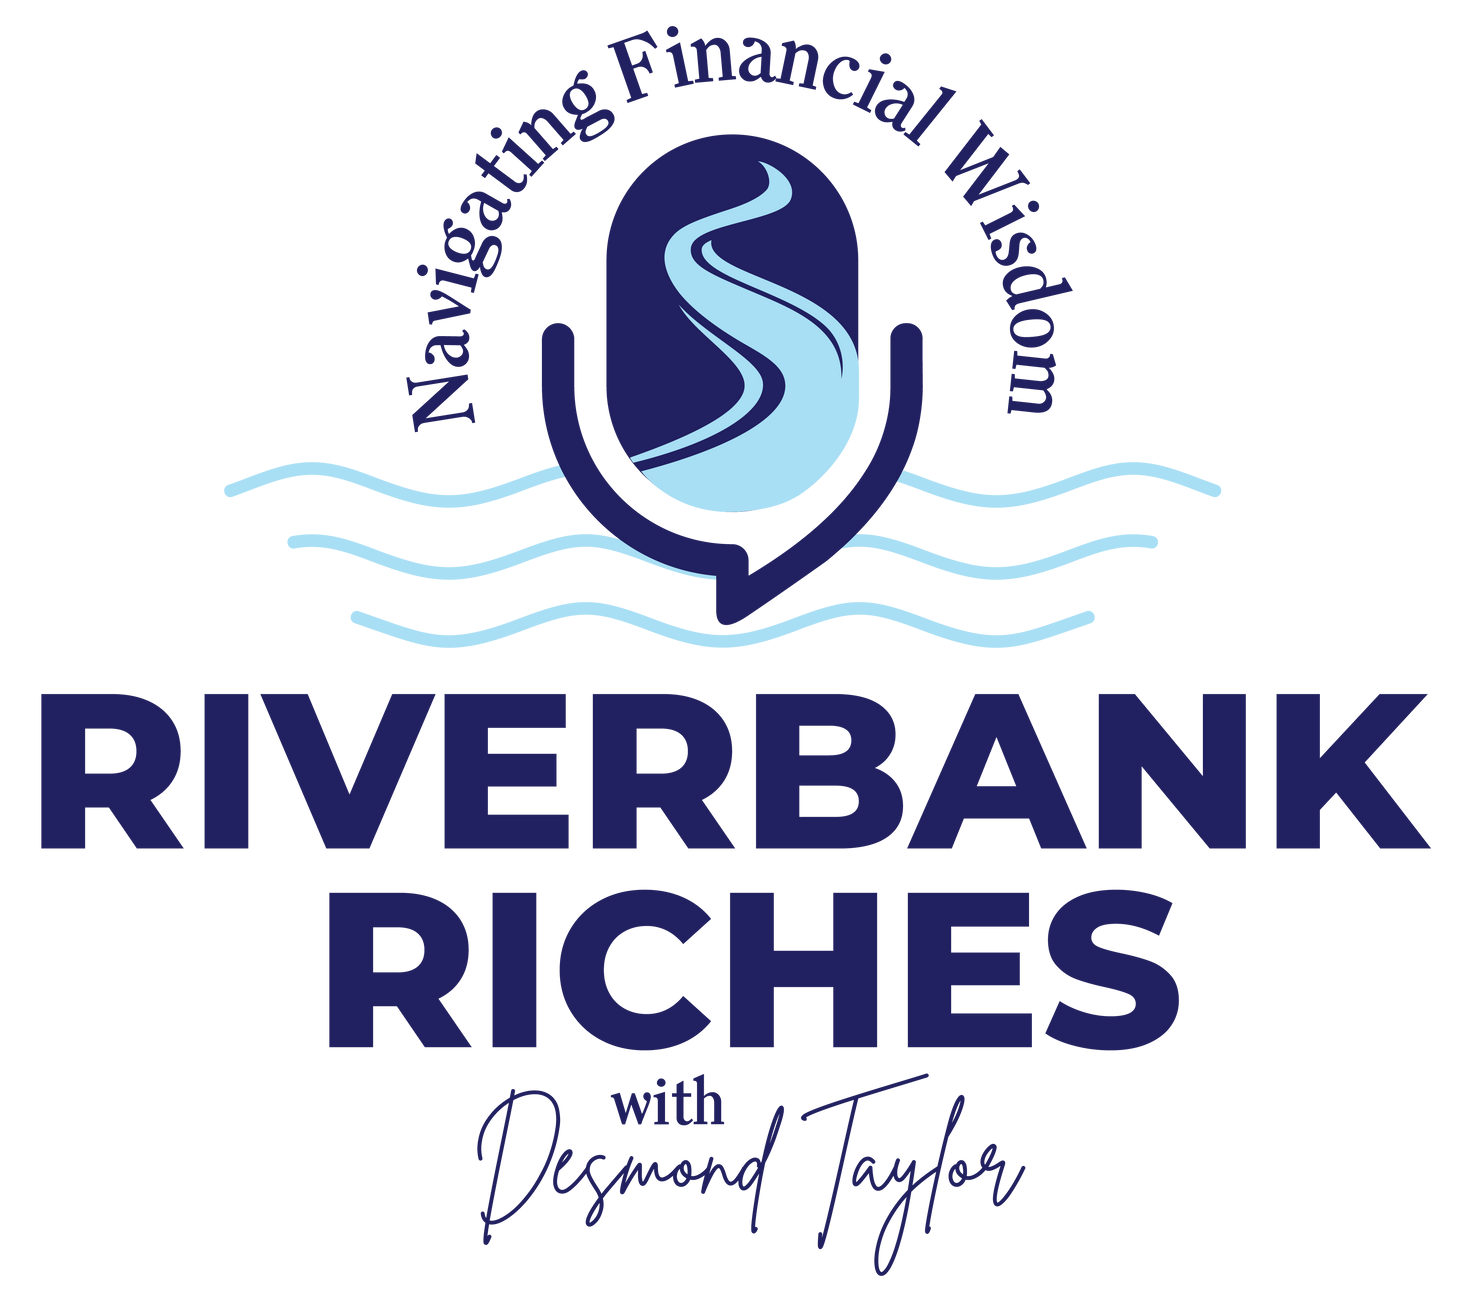 Navigating Financial Wisdom. Riverbank Riches with Desmond Taylor.